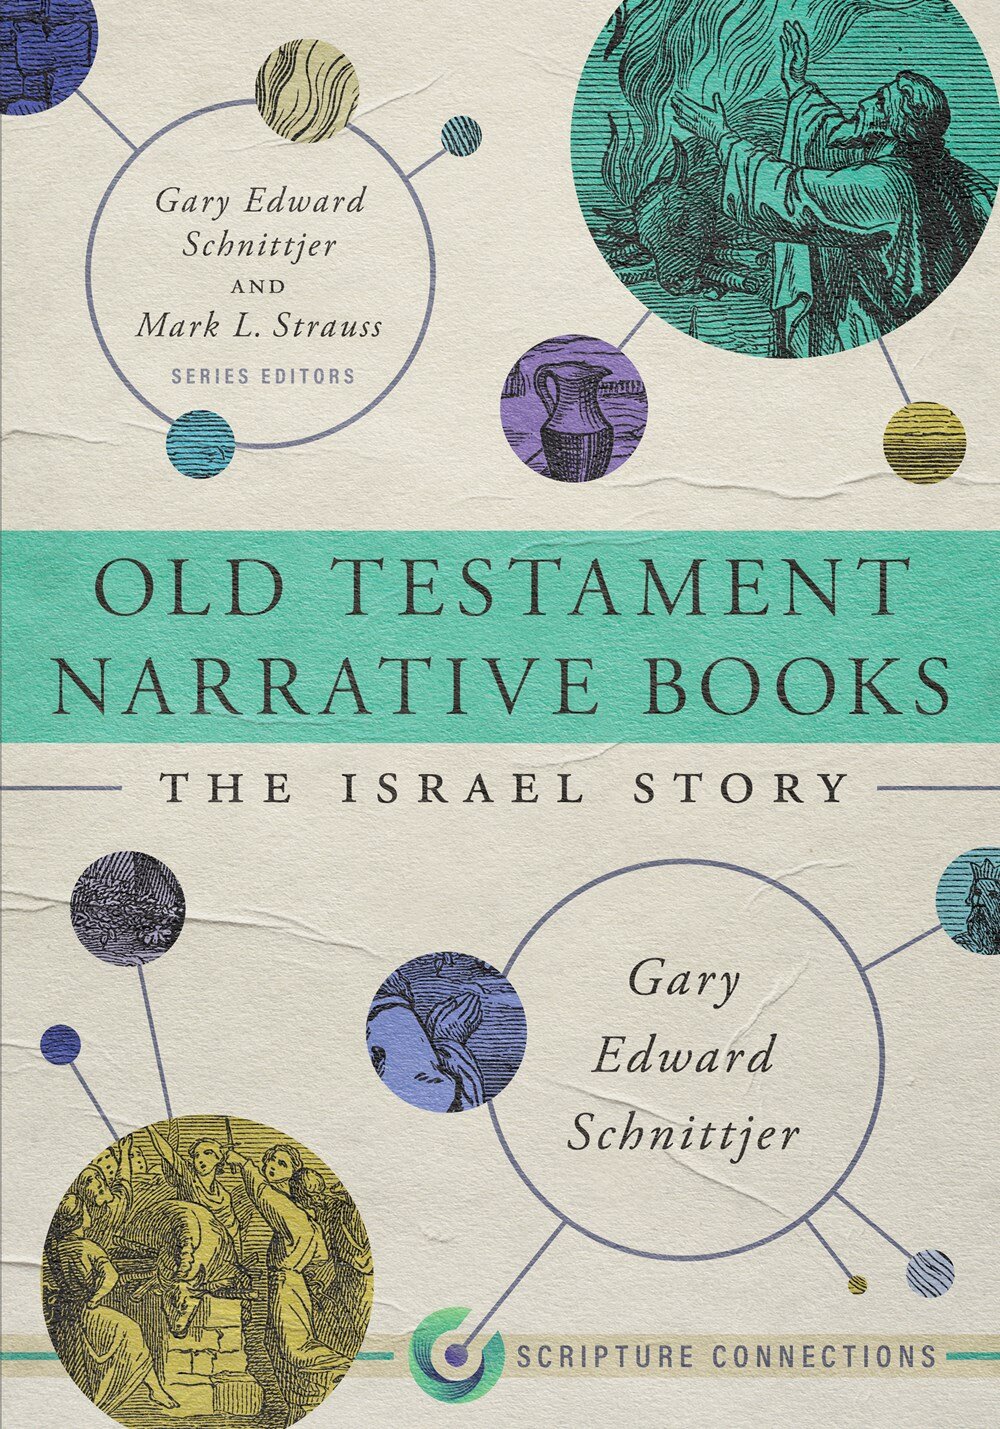 Old Testament Narrative Books: The Israel Story (Scripture Connections)